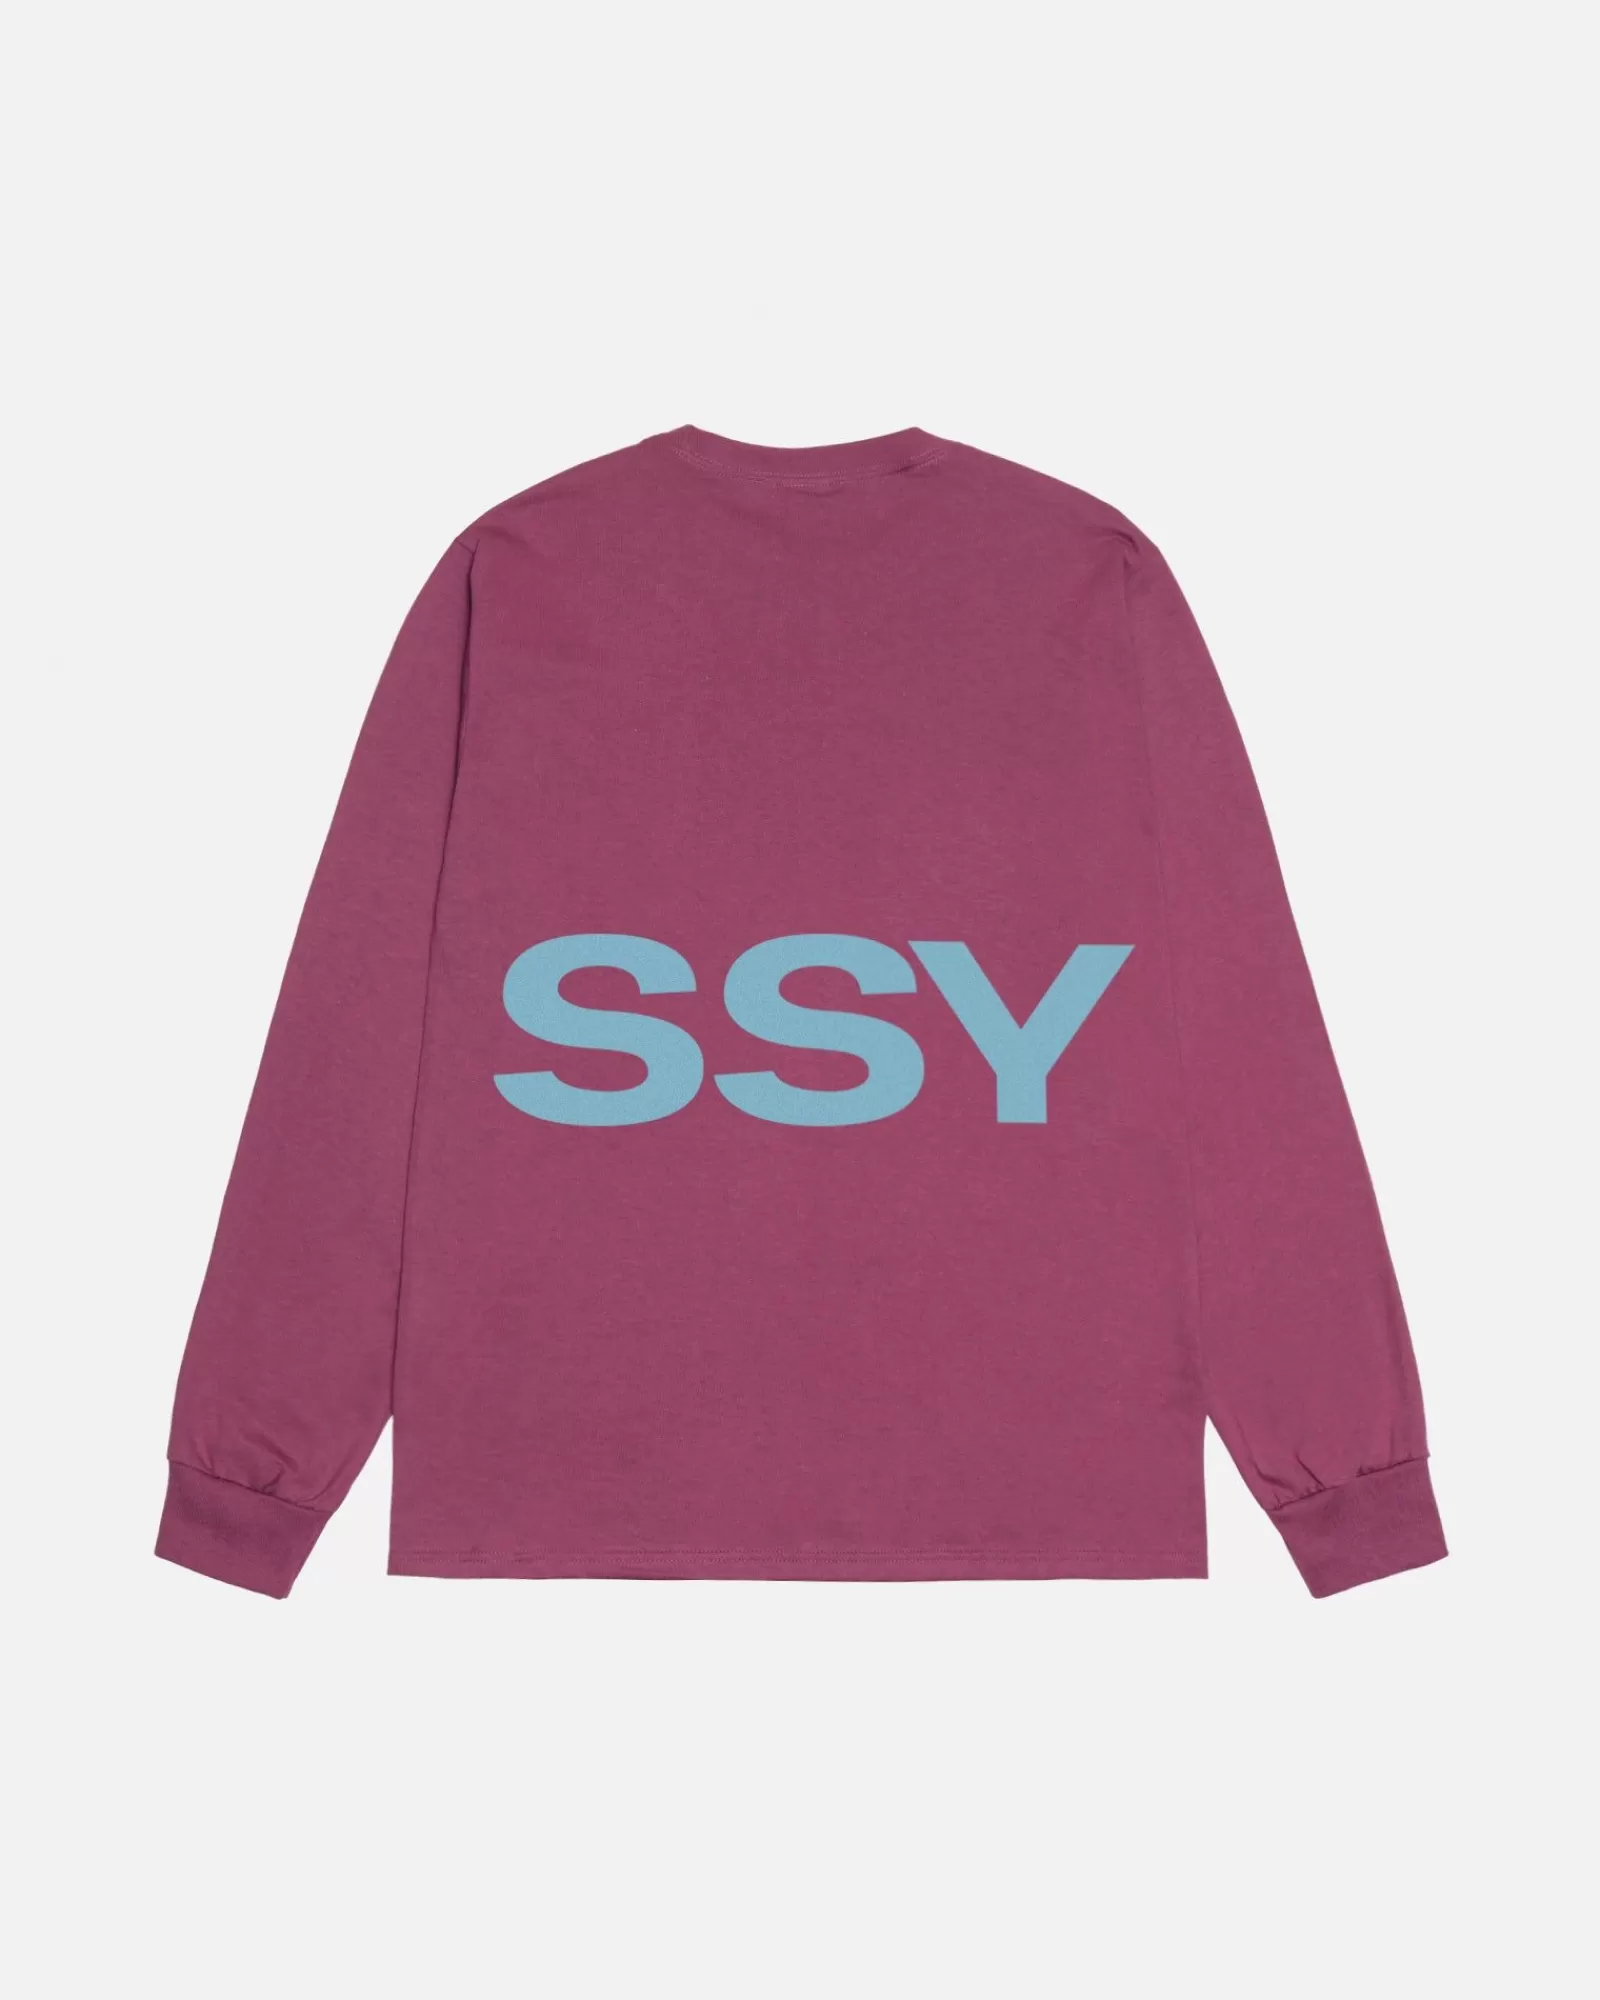 Stüssy All Caps Ls Tee Outlet